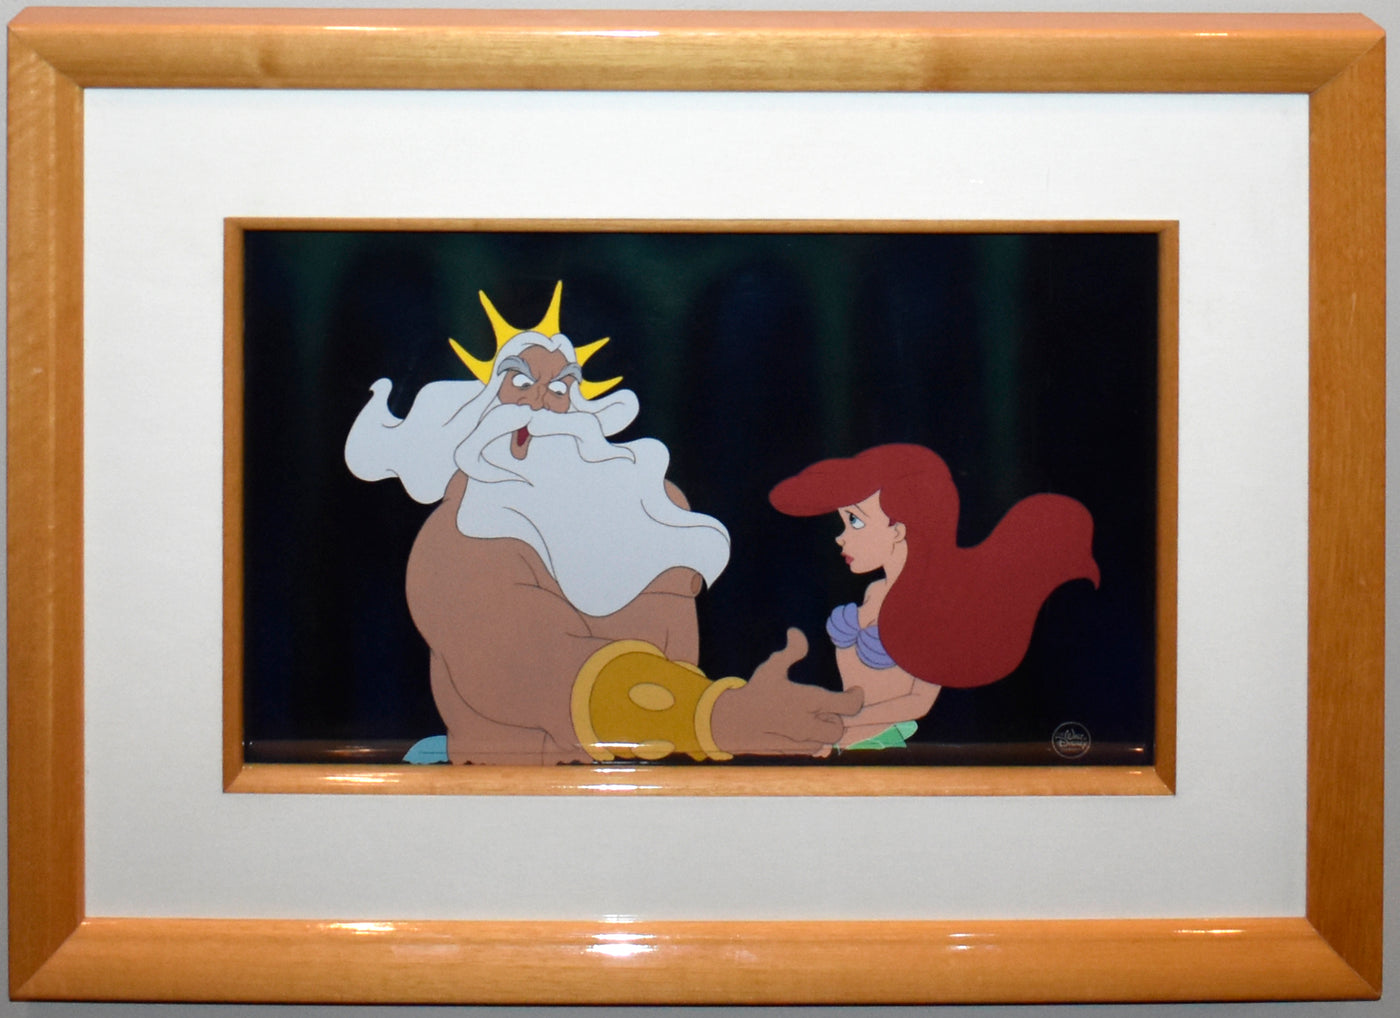 Original Walt Disney Production Cel from The Little Mermaid featuring King Triton and Ariel